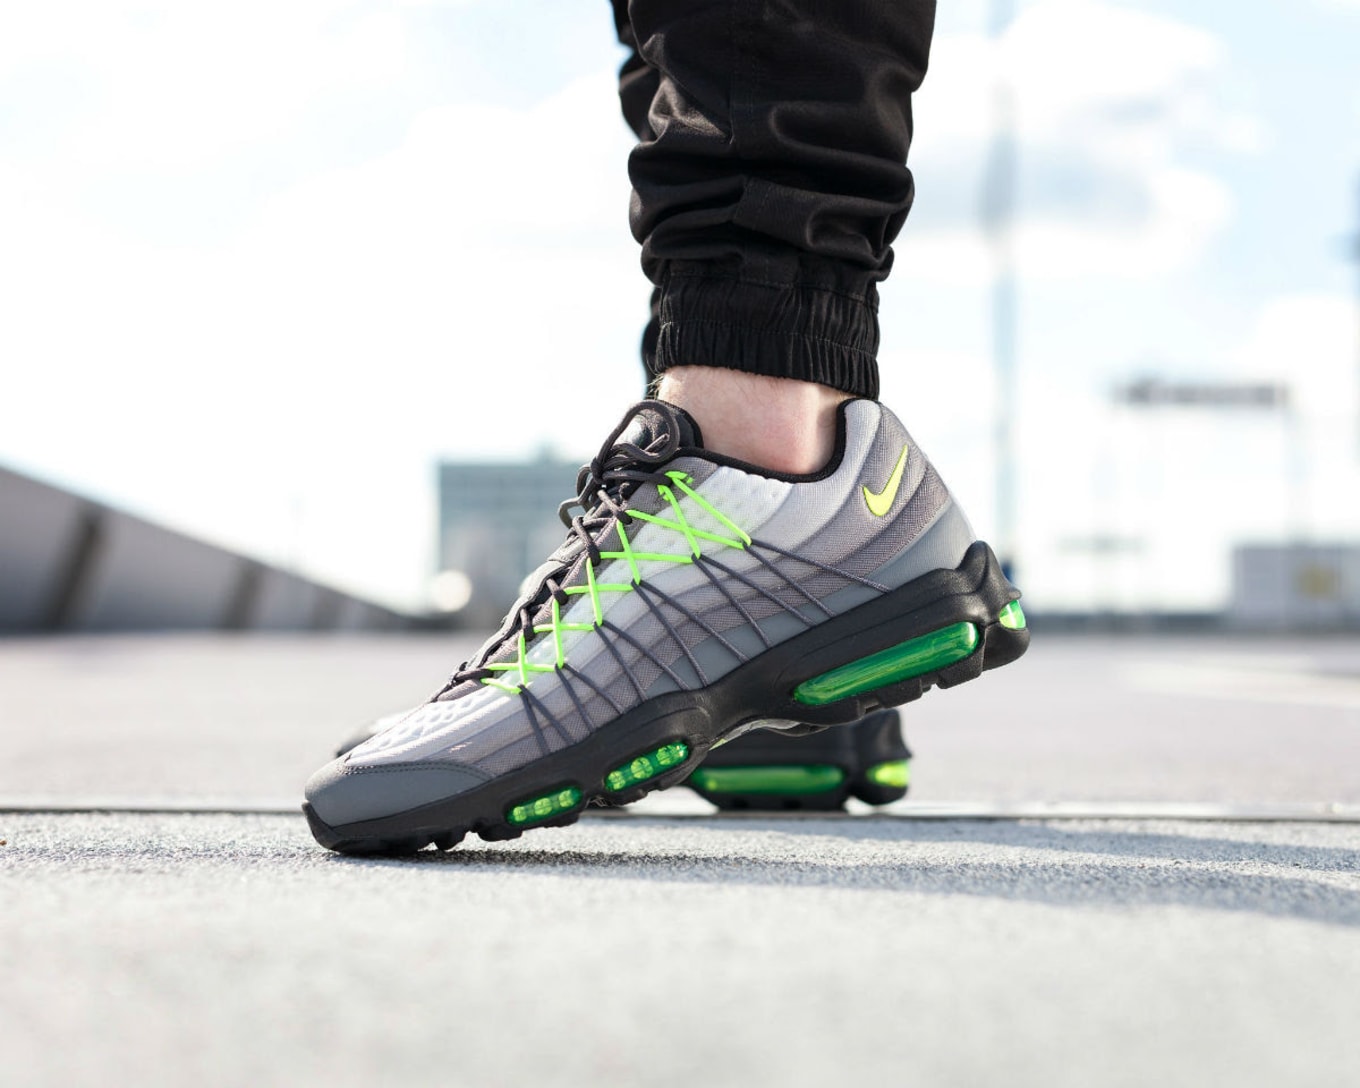 air max 95 se neon collection